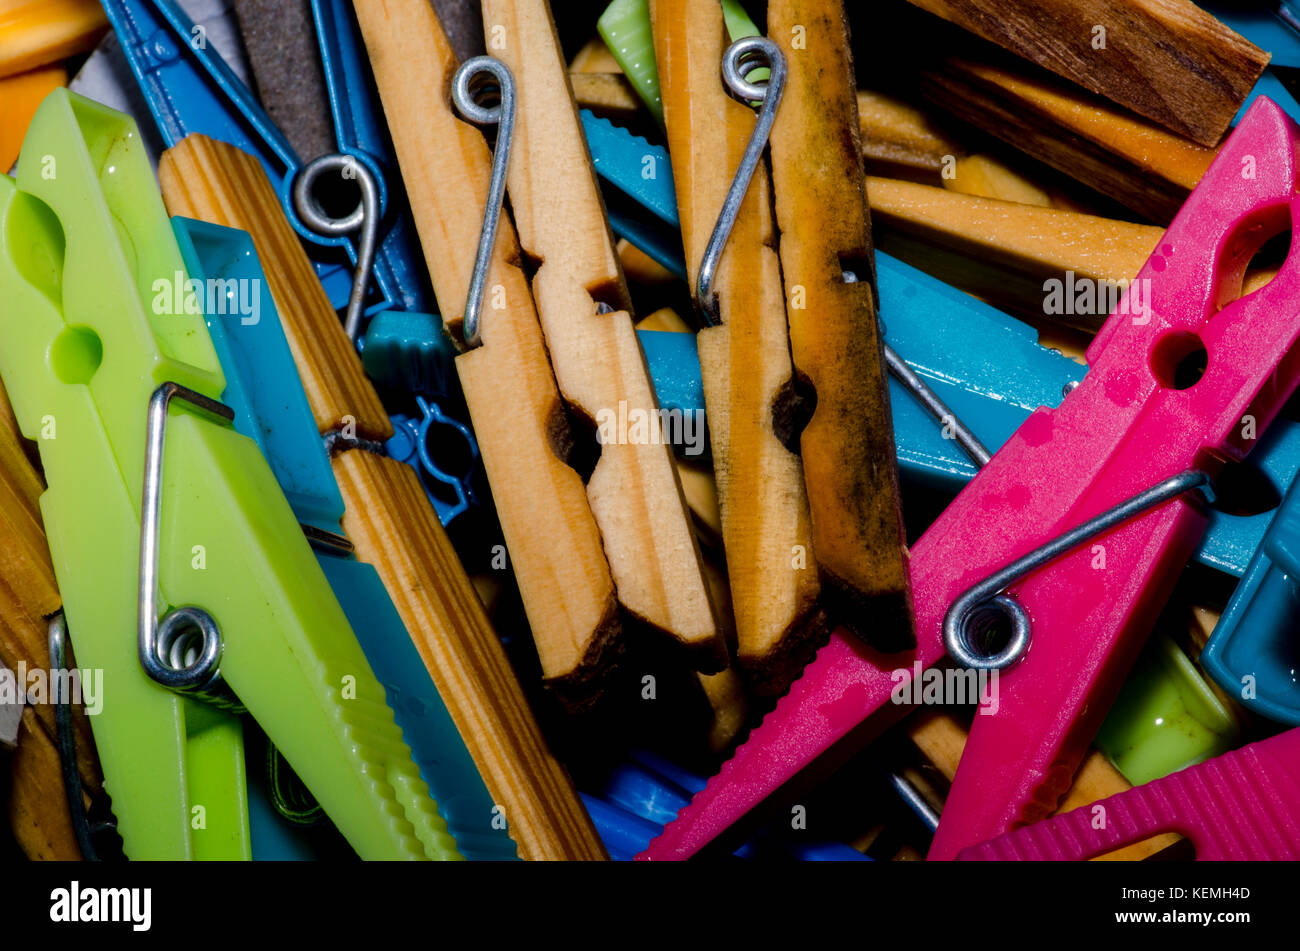 Wooden and plastic clothes pegs Stock Photo